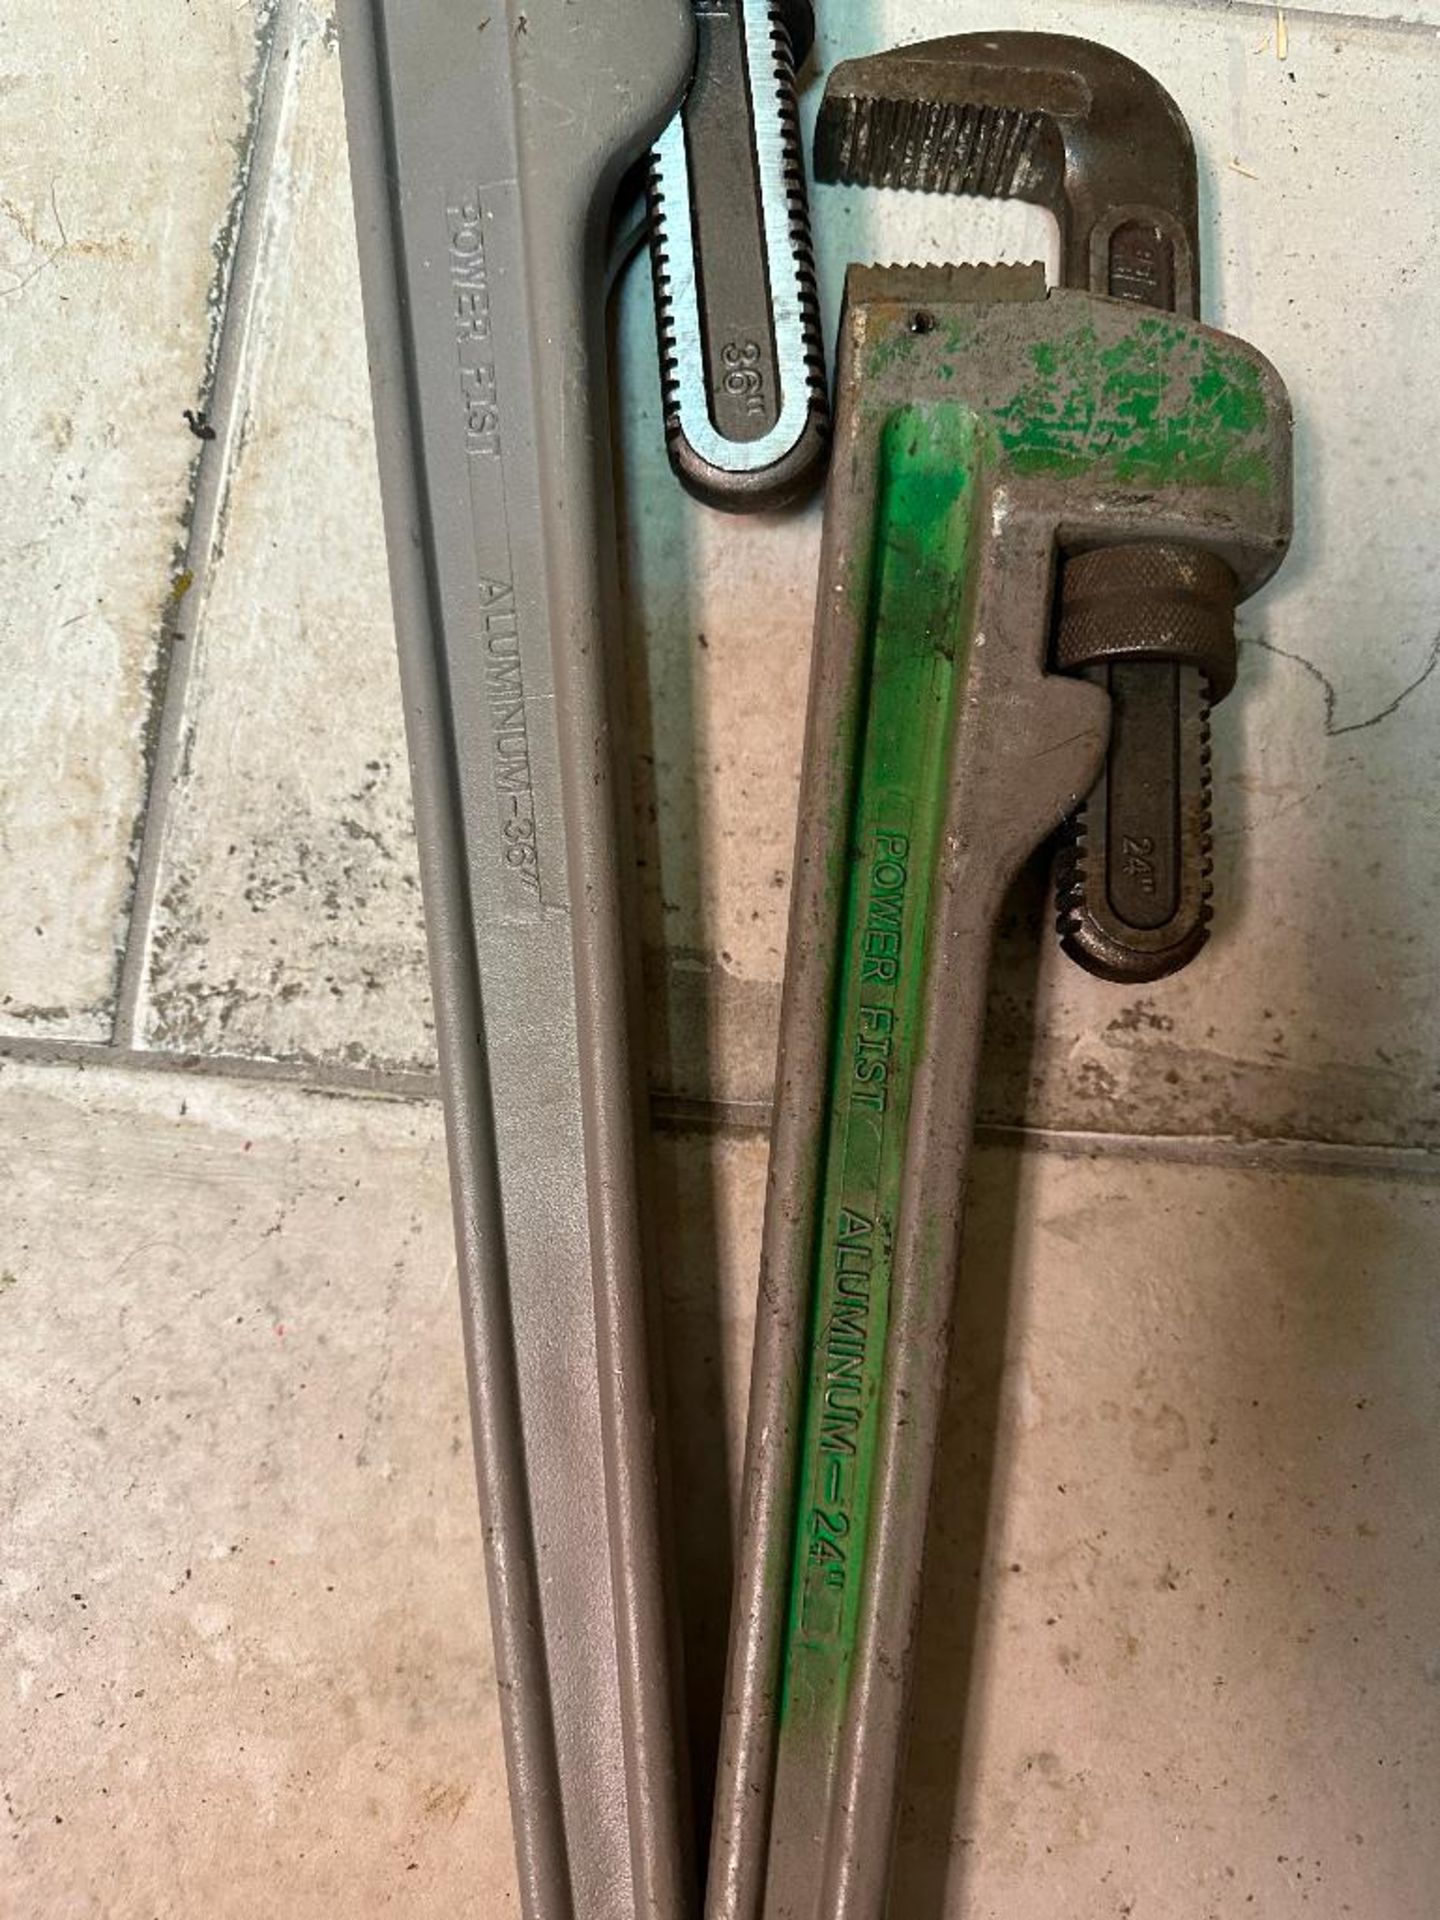 Lot of (1) Powerfist 36" Aluminum Pipe Wrench and (1) Powerfist 24" Aluminum Pipe Wrench - Image 3 of 3